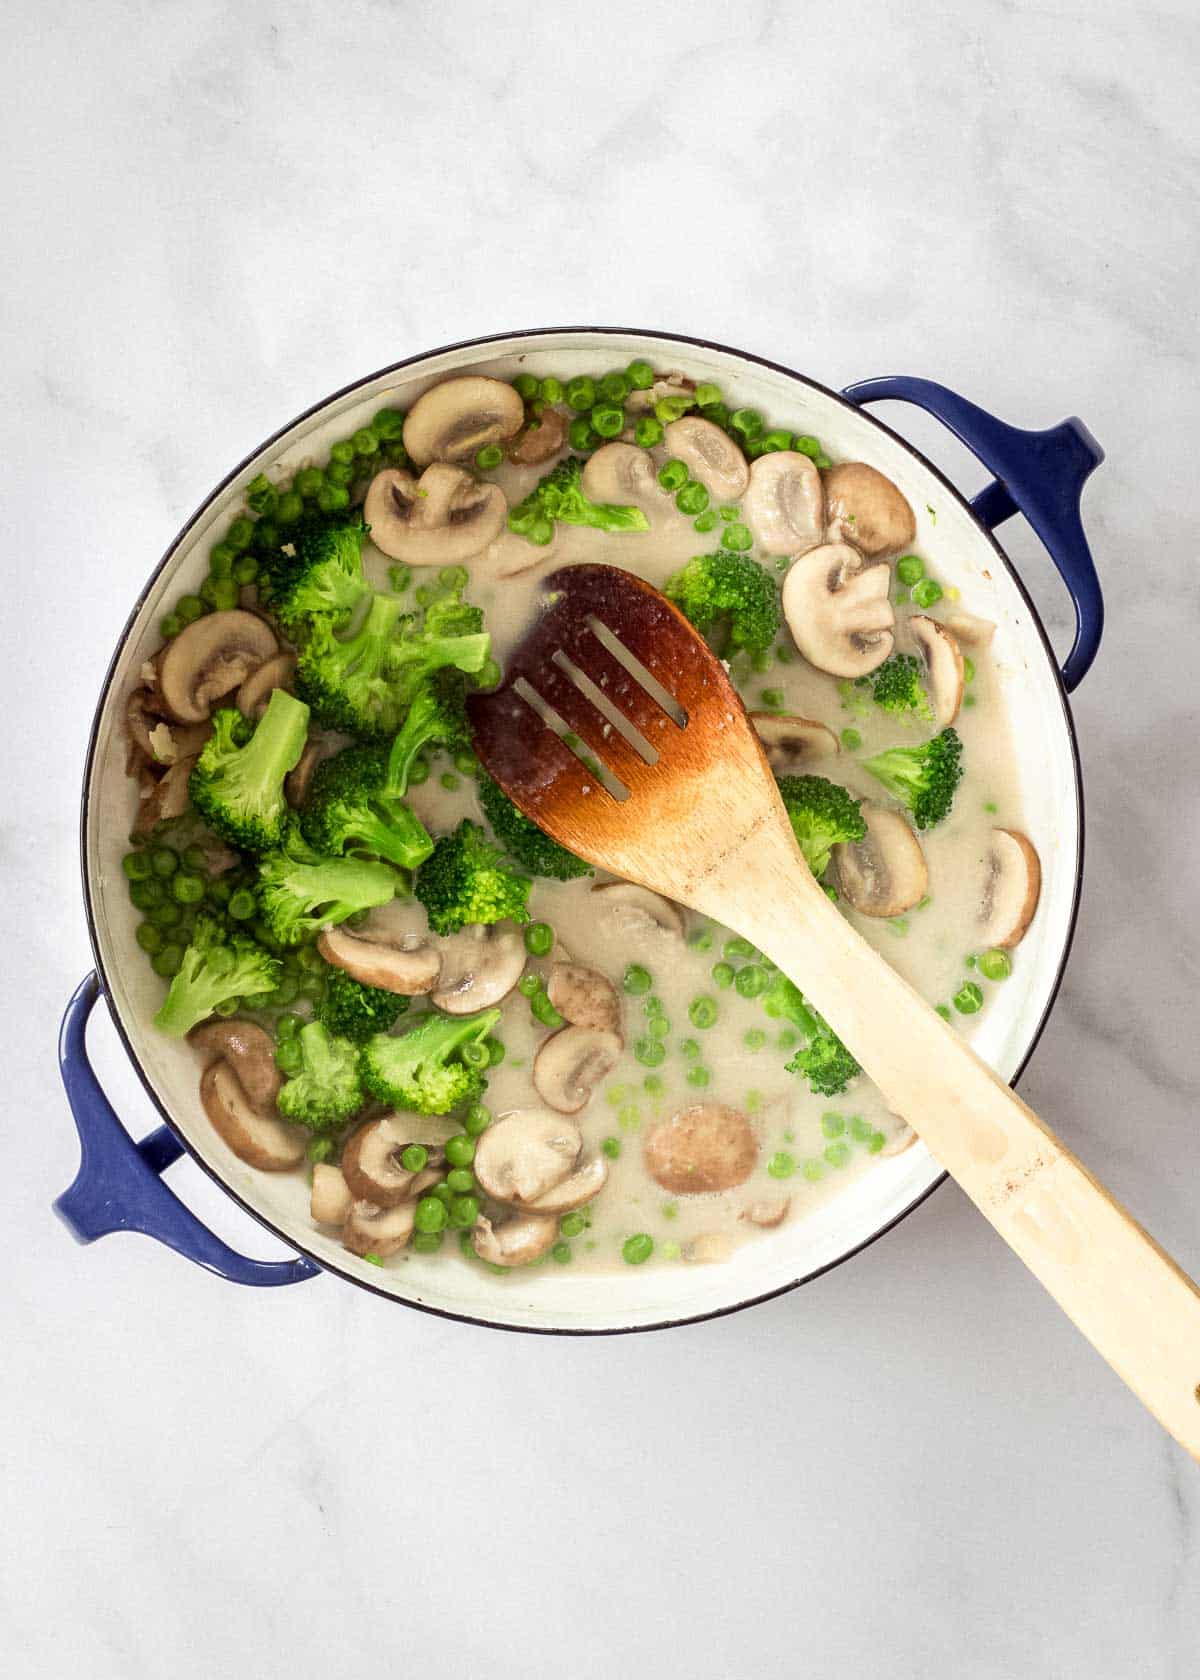 Large enamel pot with wooden spoon filled with mushroom broccoli pasta sauce.